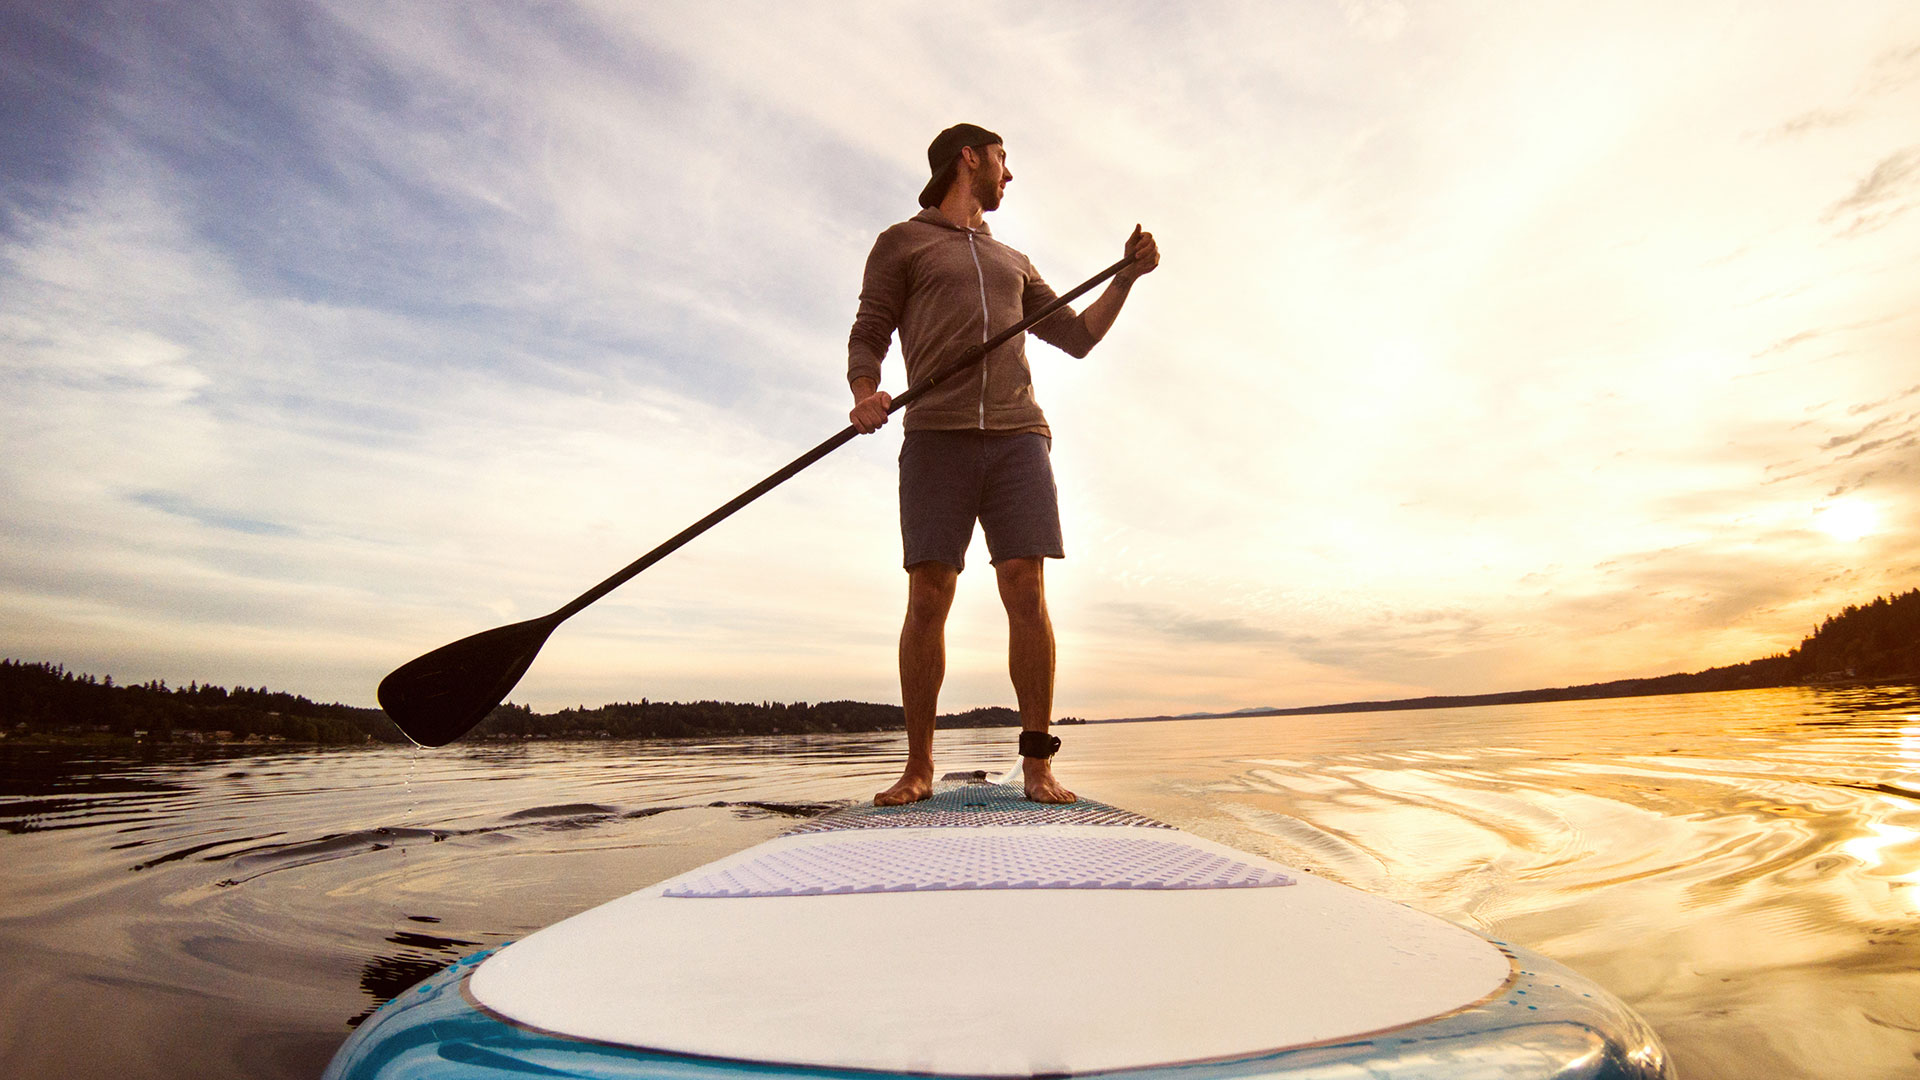 A man stands on a paddle board in the middle of a lake at sunrise.